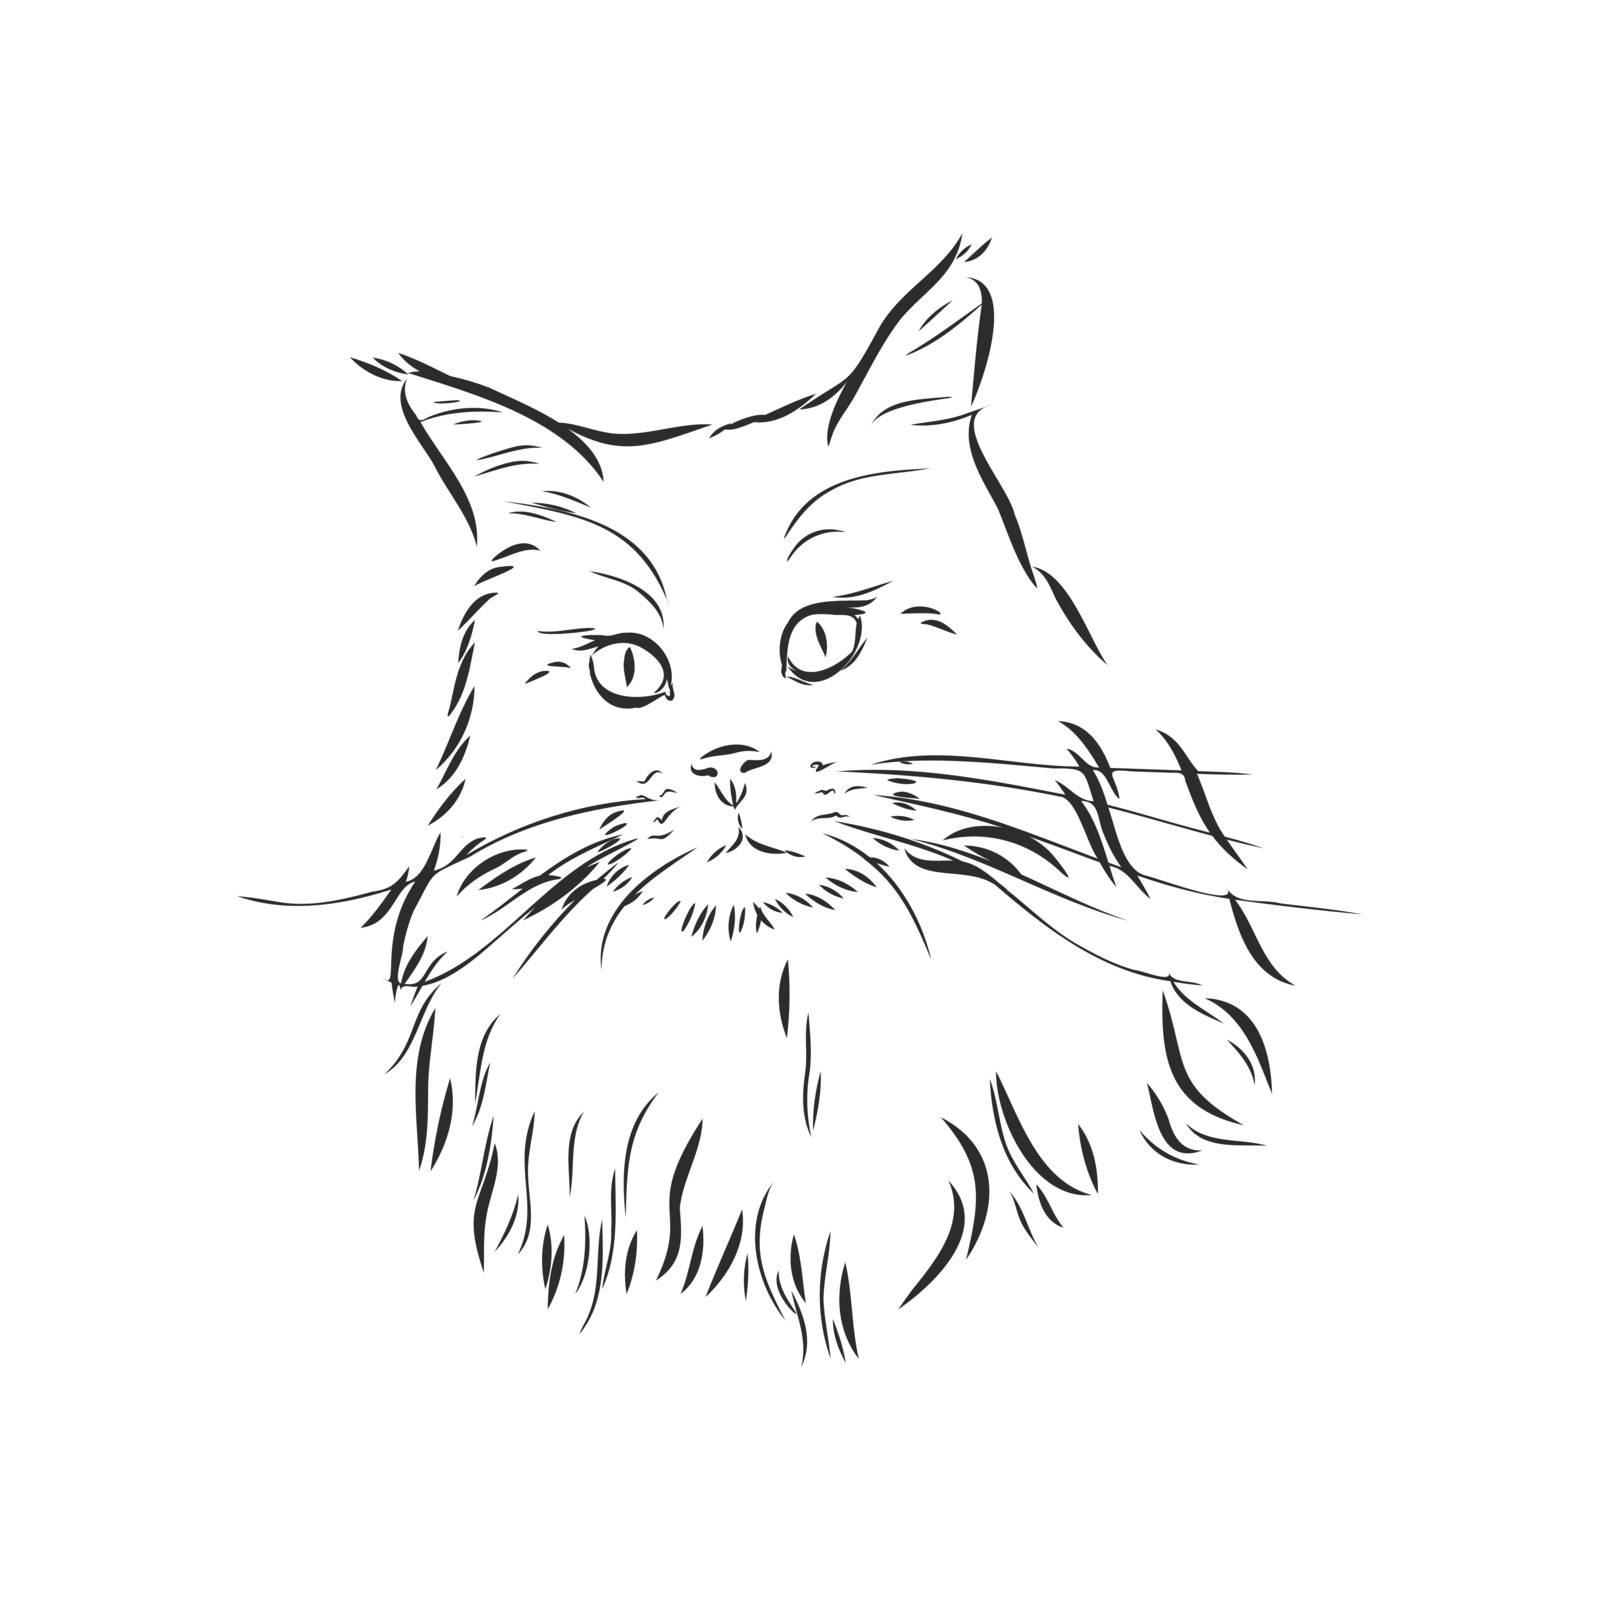 portrait of a cat, domestic cat, vector illustration of a sketch by ekaterina